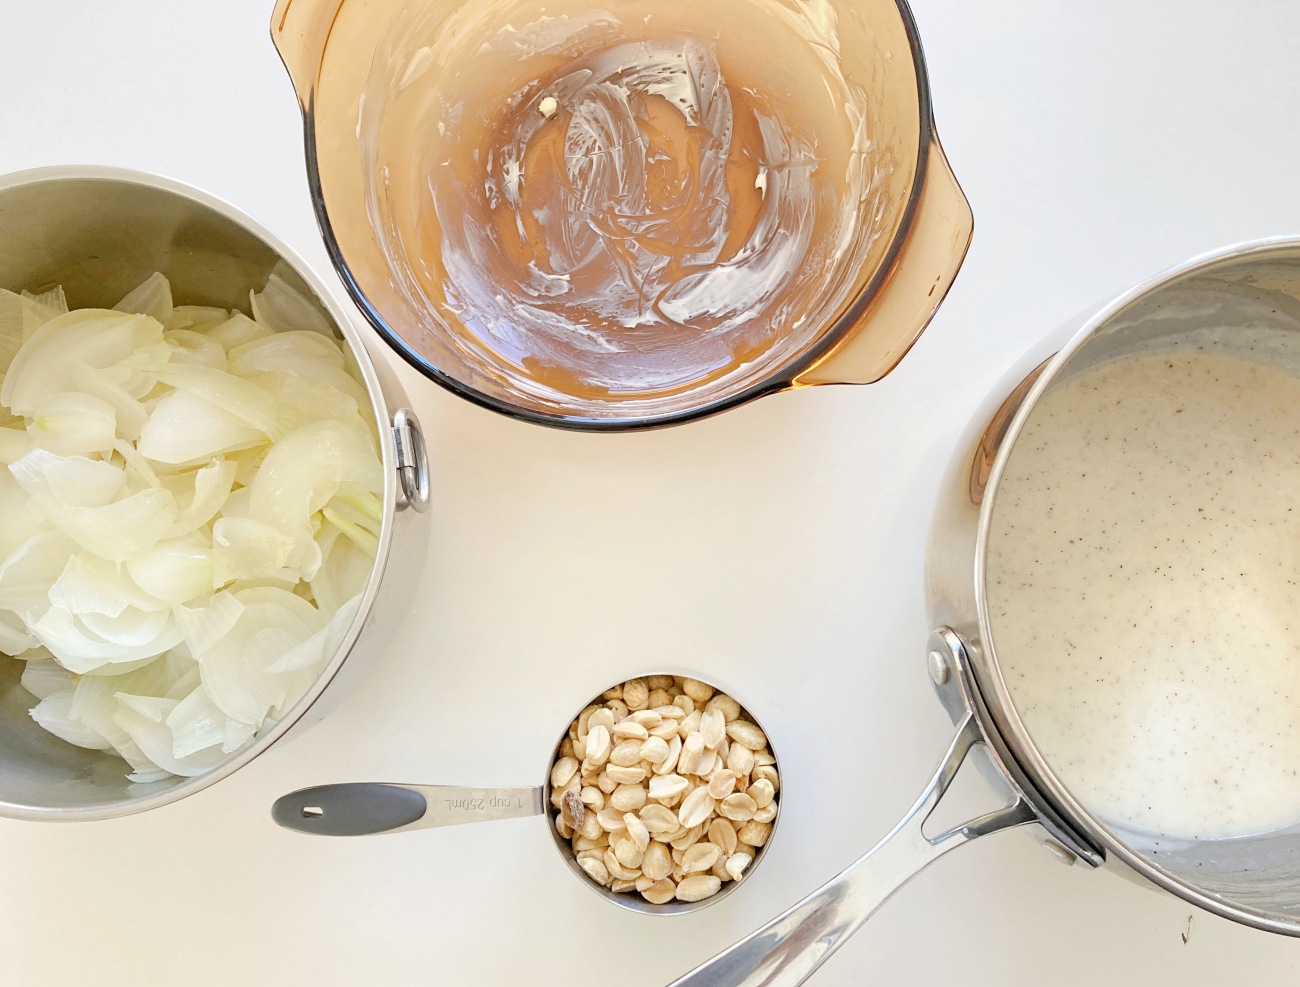 Place a layer of onions on the bottom of a greased 2-quart baking dish. Sprinkle a layer of peanuts and then top with some sauce. Repeat process until onions, sauce, and peanuts are all used up, ending with a sauce layer.